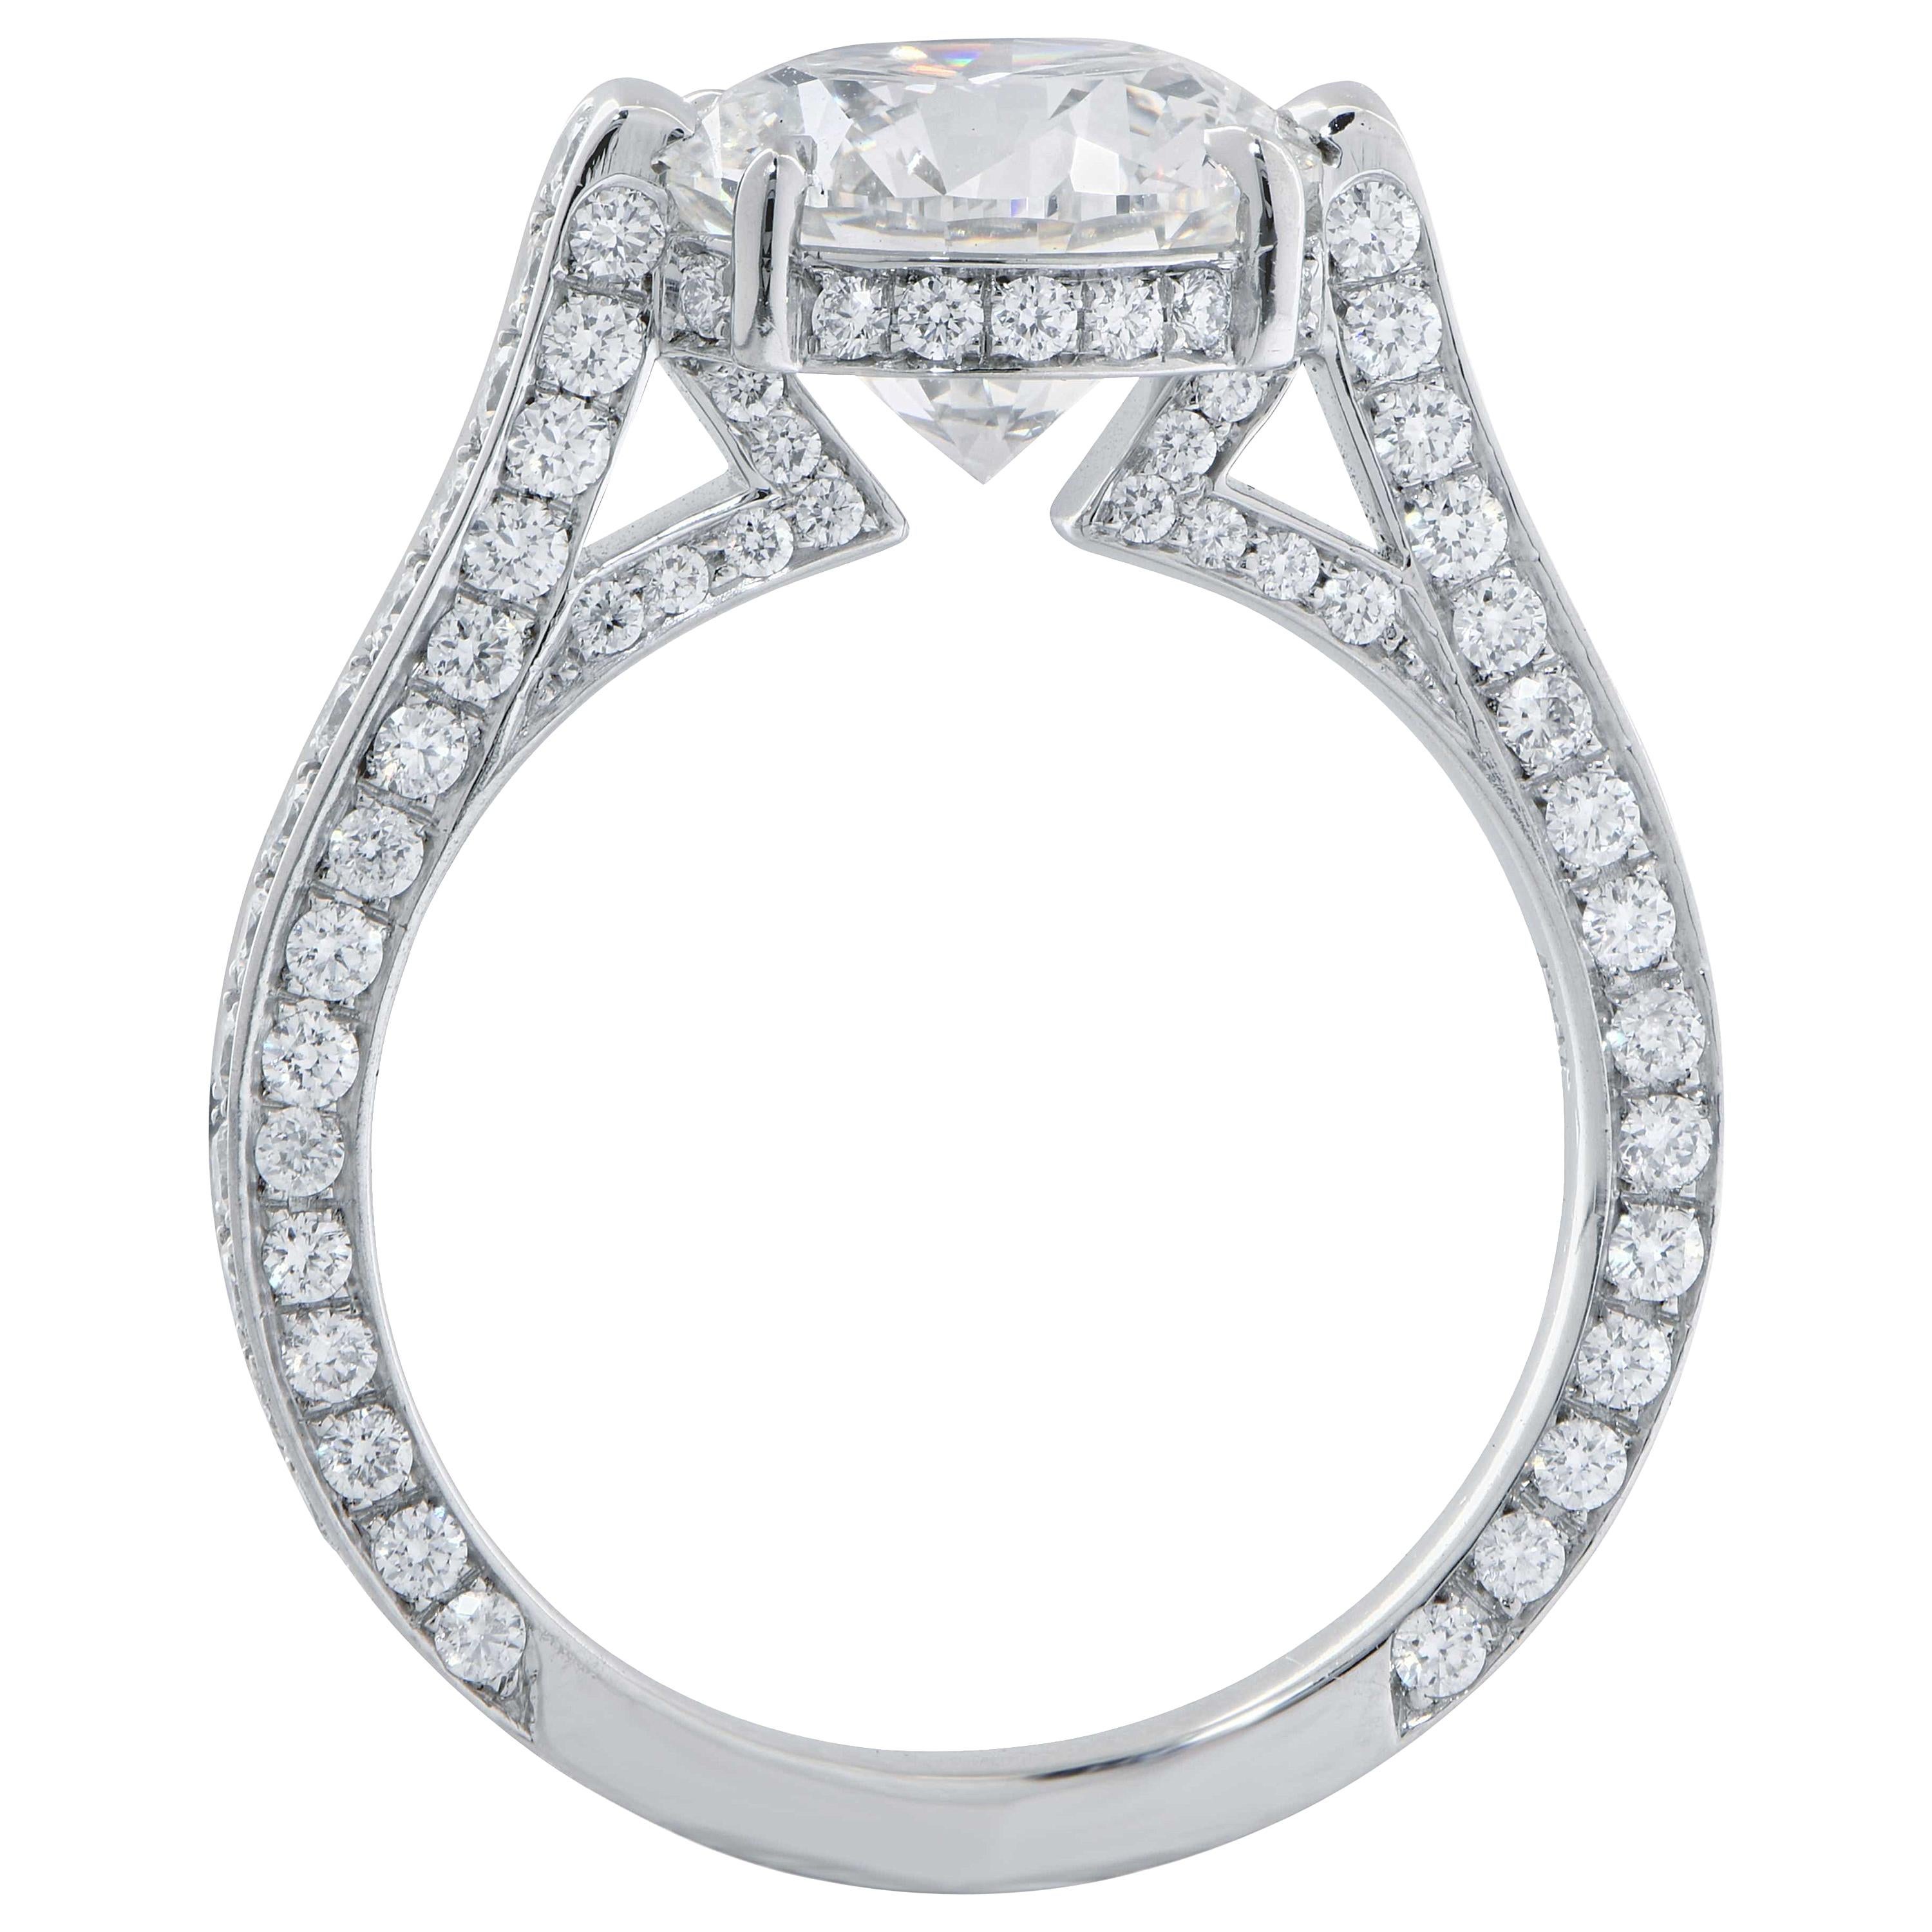 Regent Jewelers' platinum engagement ring features a round brilliant cut diamond weighing 3.01 carats GIA graded F color VS2 clarity. The ring is adorned by 128 round brilliant cut diamonds with a total weight of 1.07 carats with F color and VS